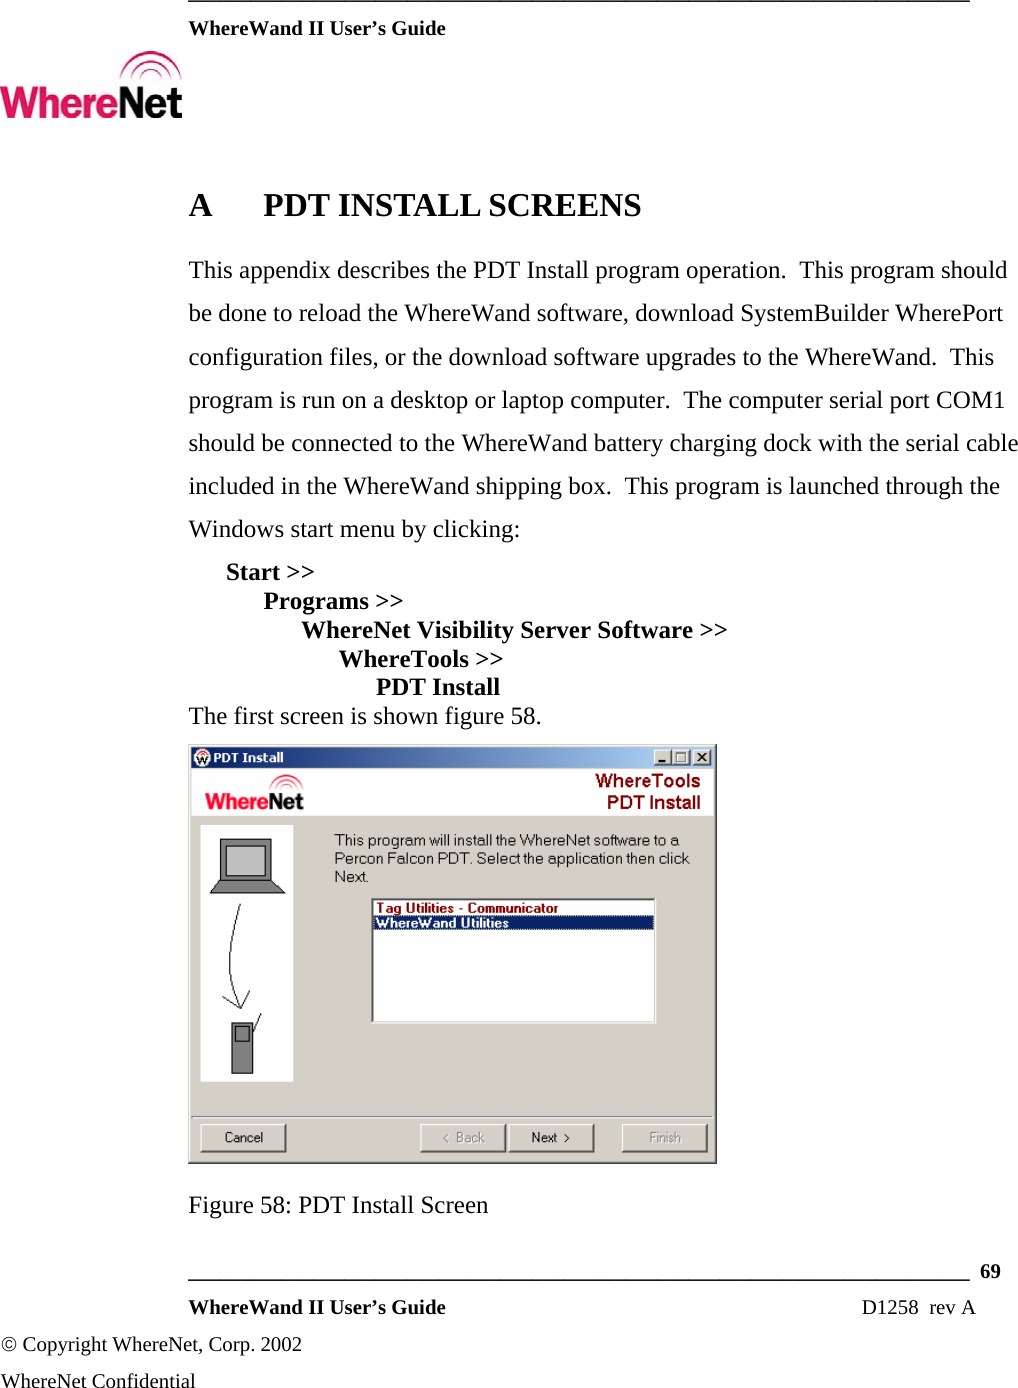  ___________________________________________________________________________  WhereWand II User’s Guide     ___________________________________________________________________________  69  WhereWand II User’s Guide                                                                          D1258  rev A © Copyright WhereNet, Corp. 2002  WhereNet Confidential A PDT INSTALL SCREENS This appendix describes the PDT Install program operation.  This program should be done to reload the WhereWand software, download SystemBuilder WherePort configuration files, or the download software upgrades to the WhereWand.  This program is run on a desktop or laptop computer.  The computer serial port COM1 should be connected to the WhereWand battery charging dock with the serial cable included in the WhereWand shipping box.  This program is launched through the Windows start menu by clicking:  Start &gt;&gt;   Programs &gt;&gt;    WhereNet Visibility Server Software &gt;&gt;     WhereTools &gt;&gt;      PDT Install The first screen is shown figure 58.  Figure 58: PDT Install Screen 